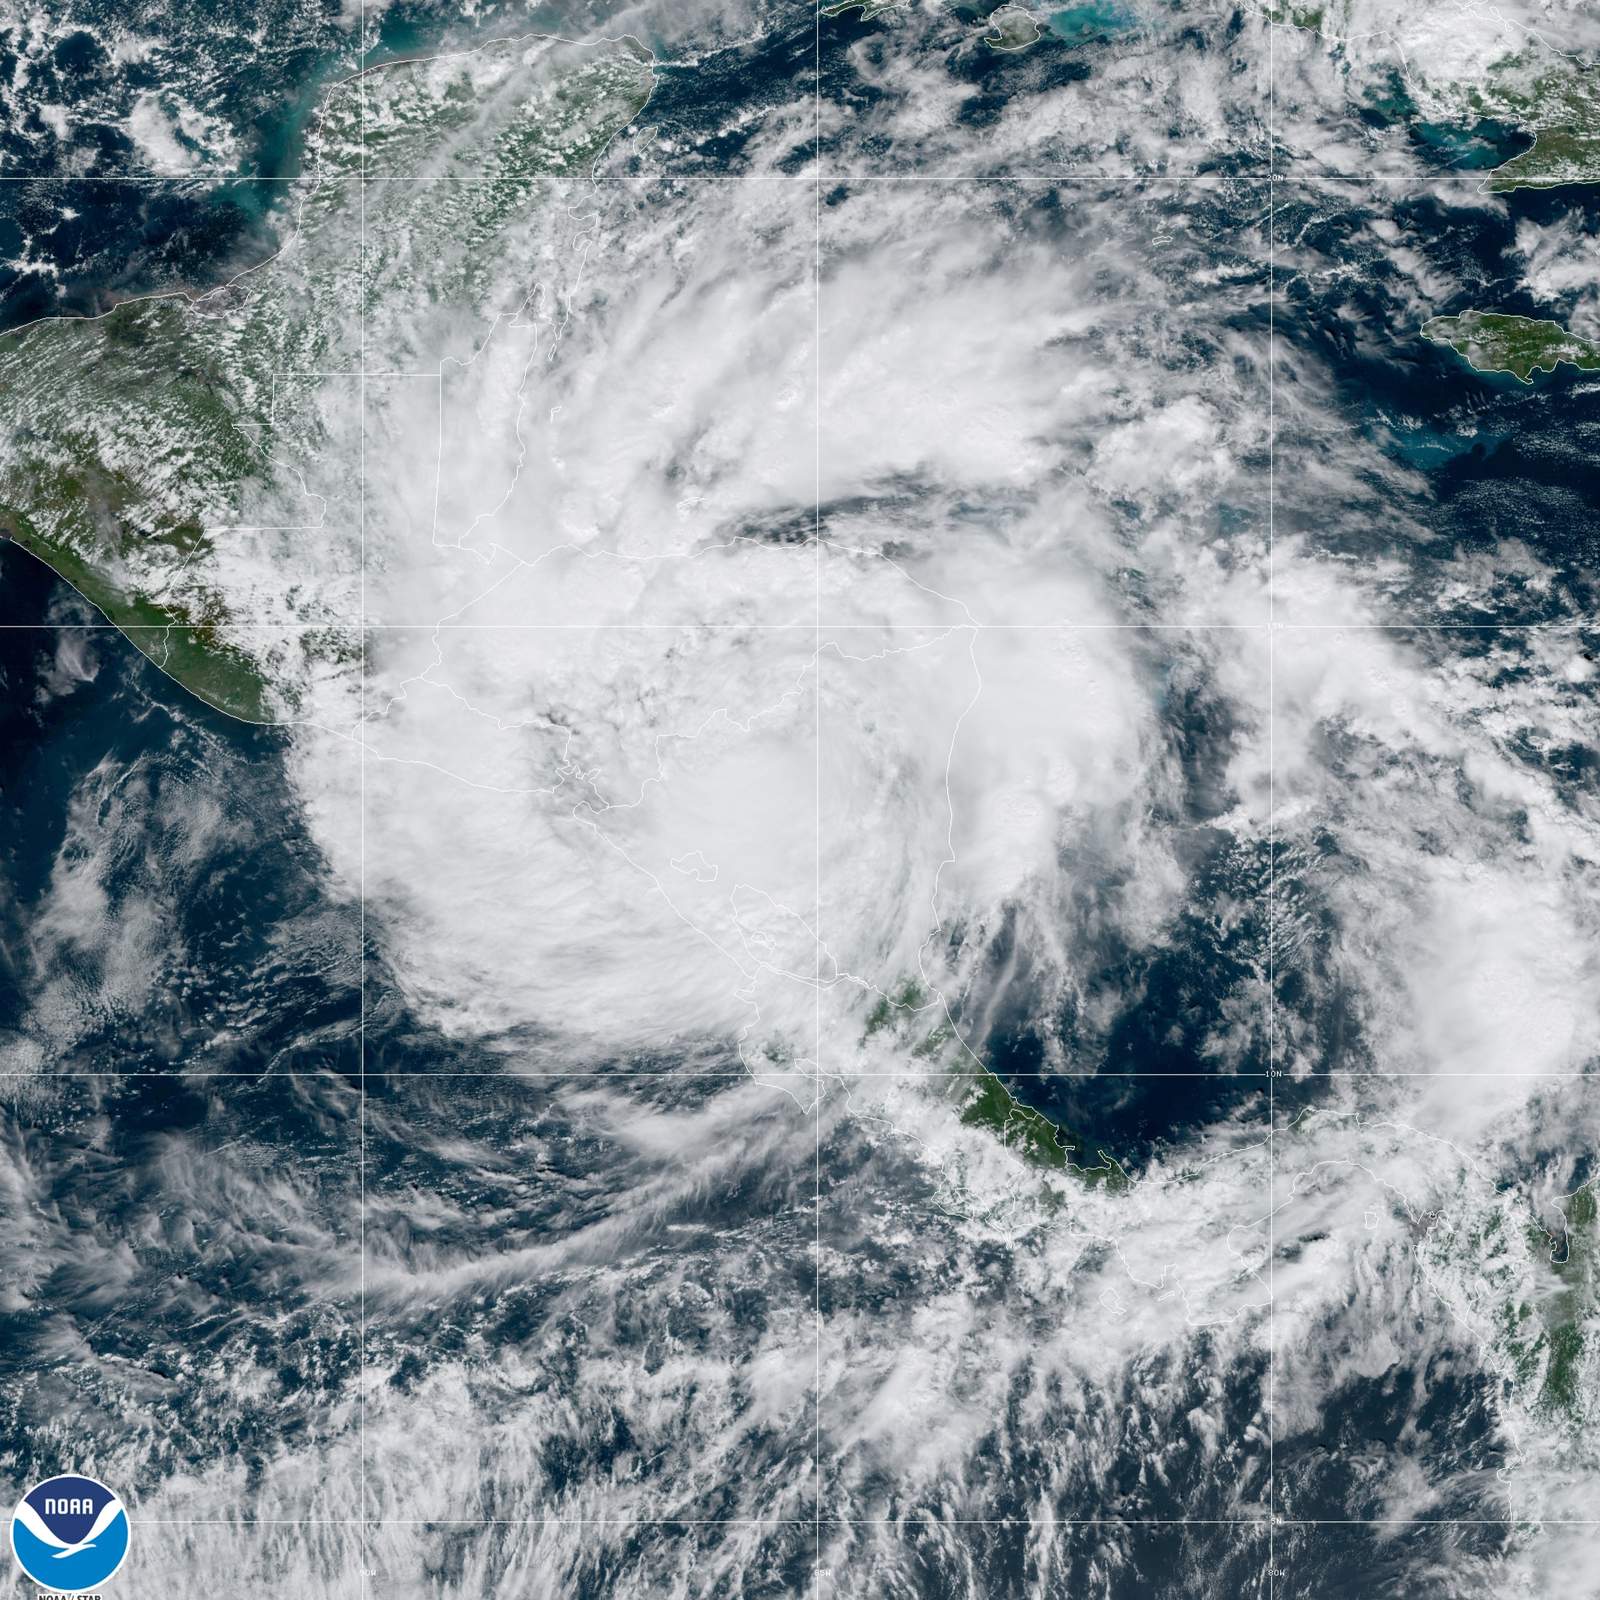 A look at what made the 2020 Hurricane Season so active